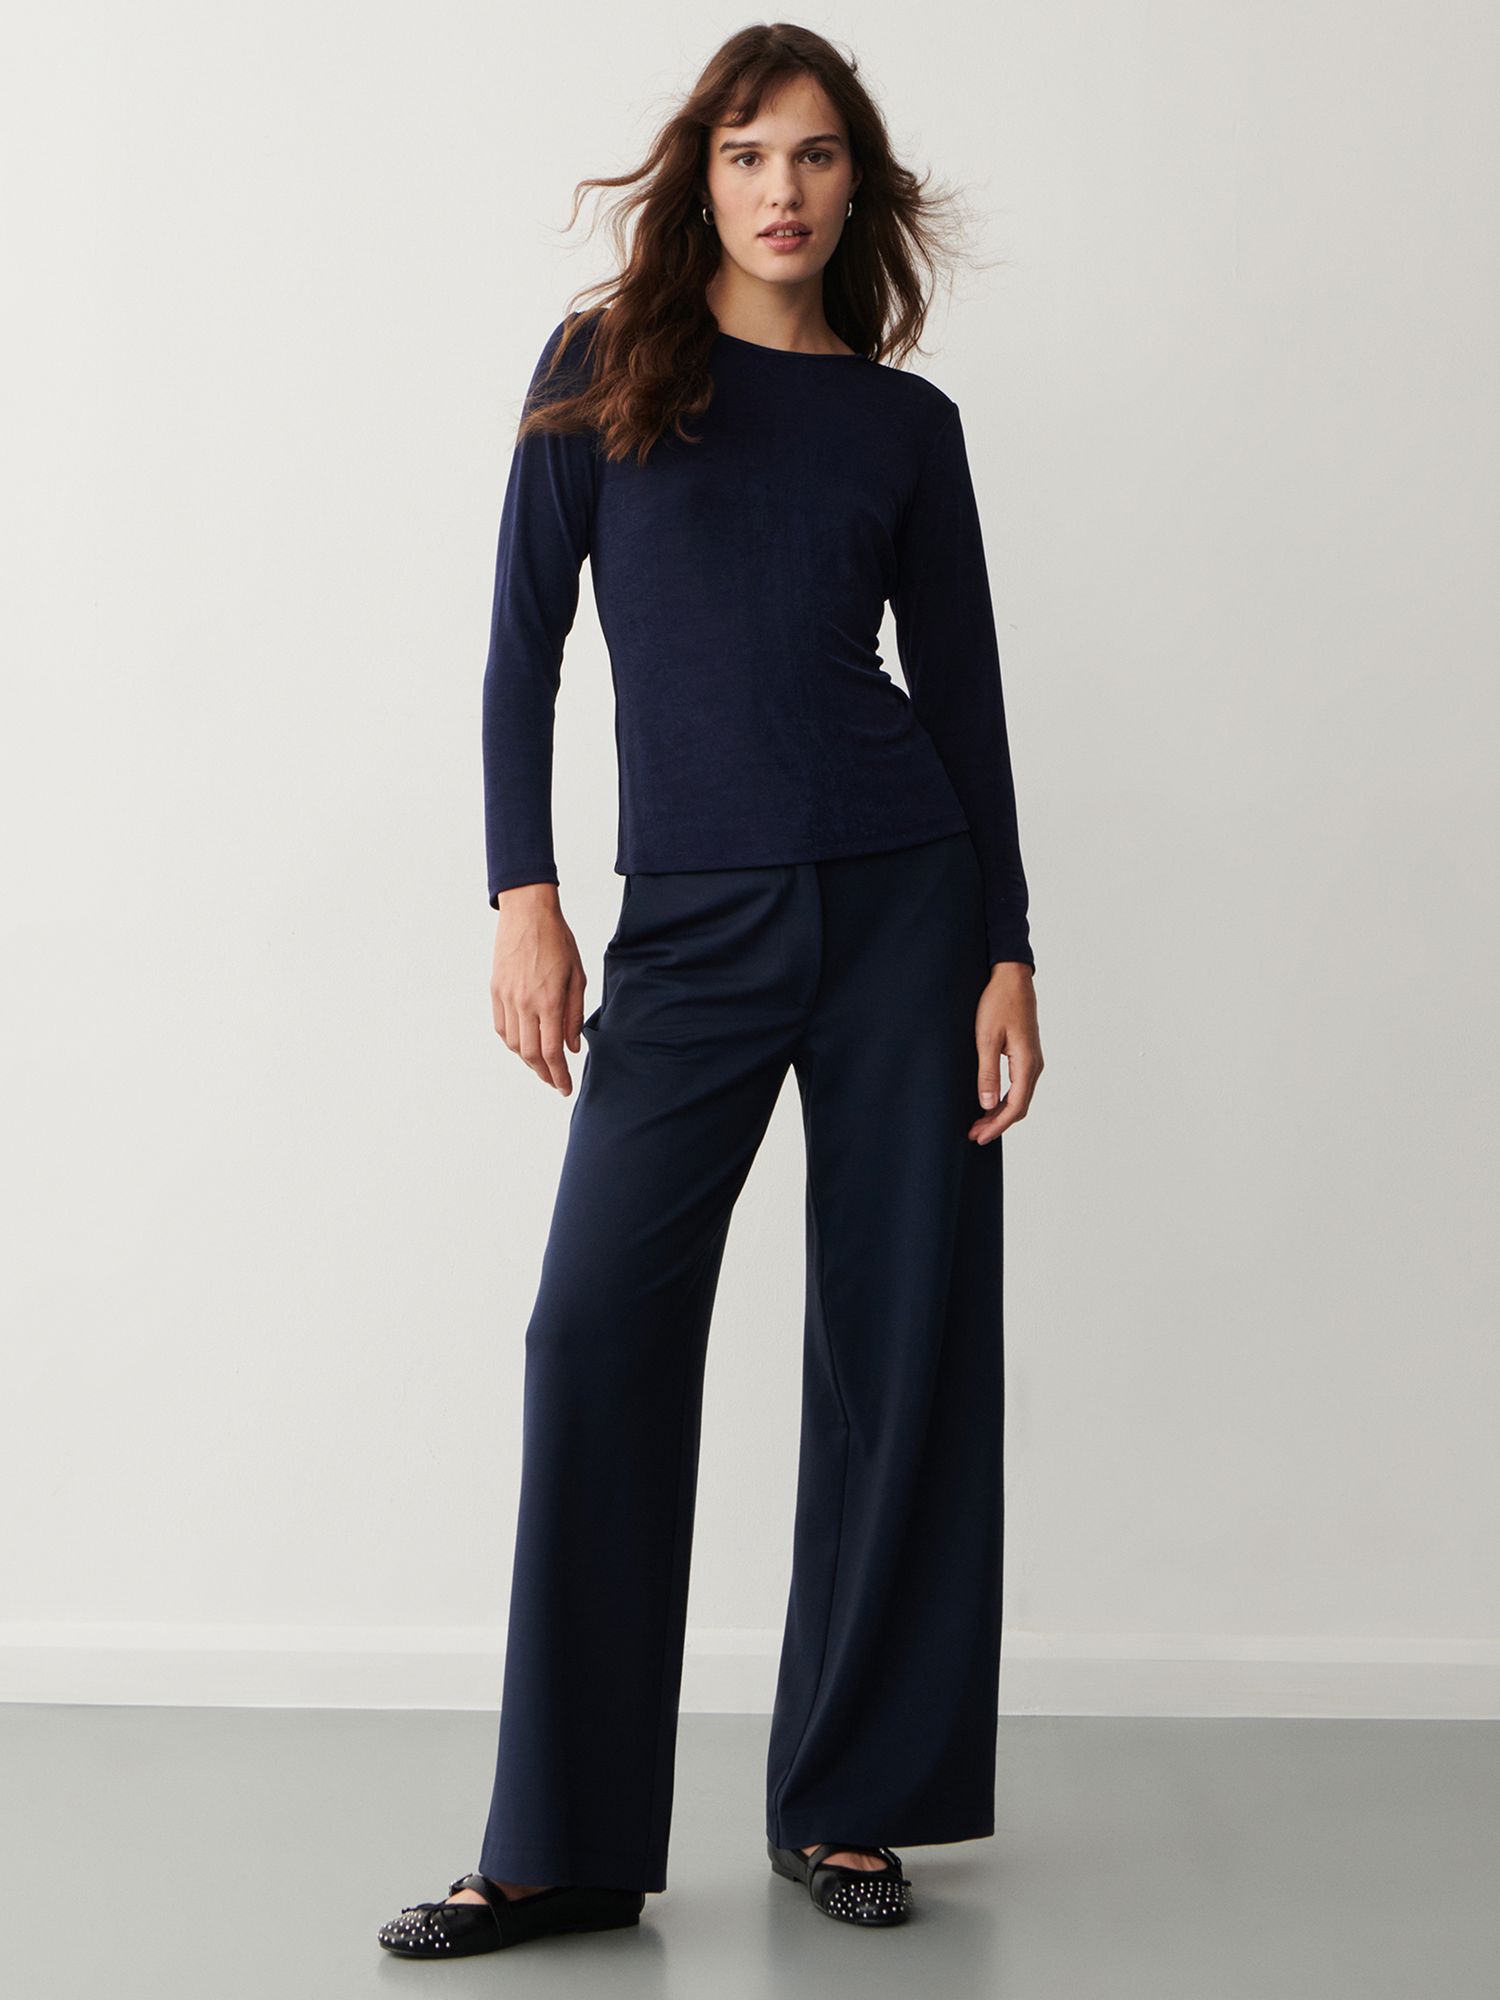 Finery Frankie Ponte Jersey Trousers, Navy at John Lewis & Partners